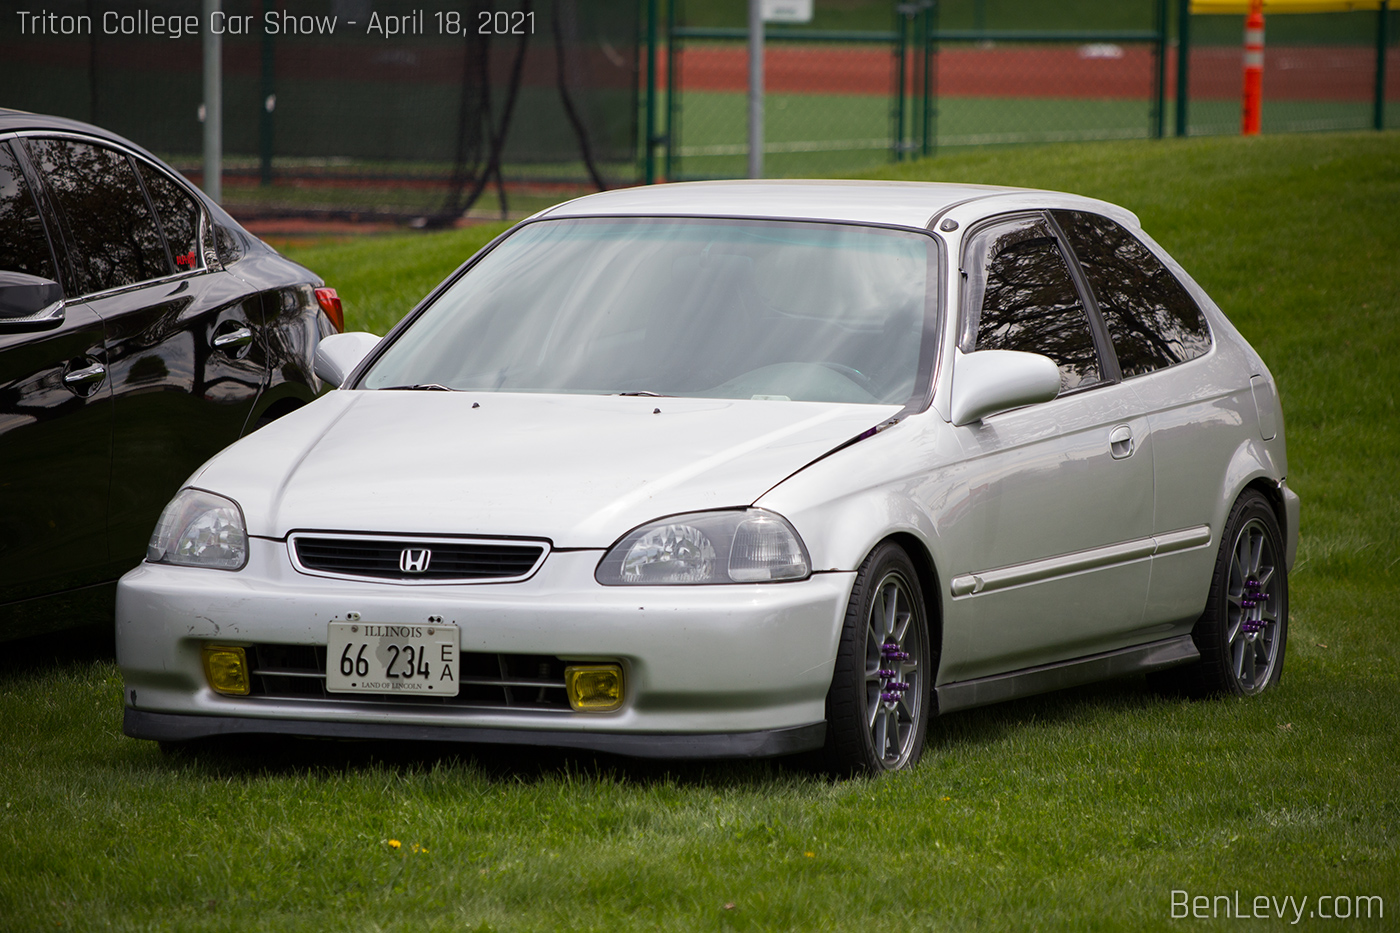 Silver Honda Civic Hatchback parked in a field